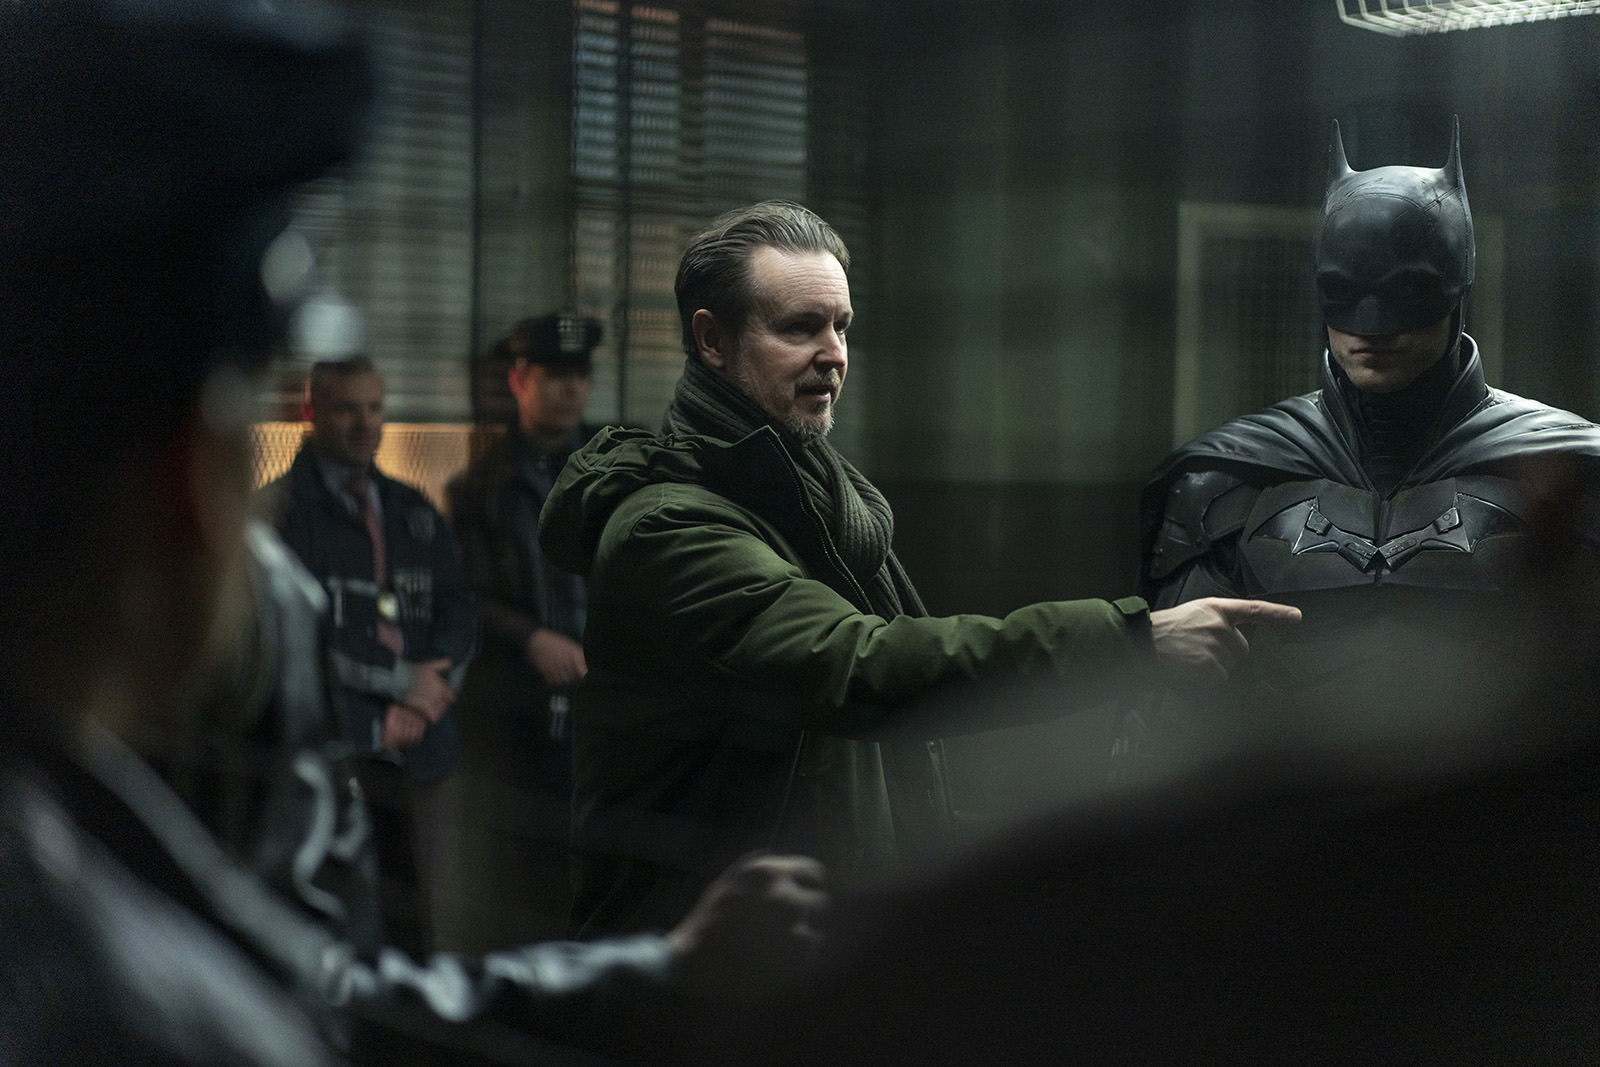 Director Matt Reeves directs on the police station set. Image © Warner Bros.